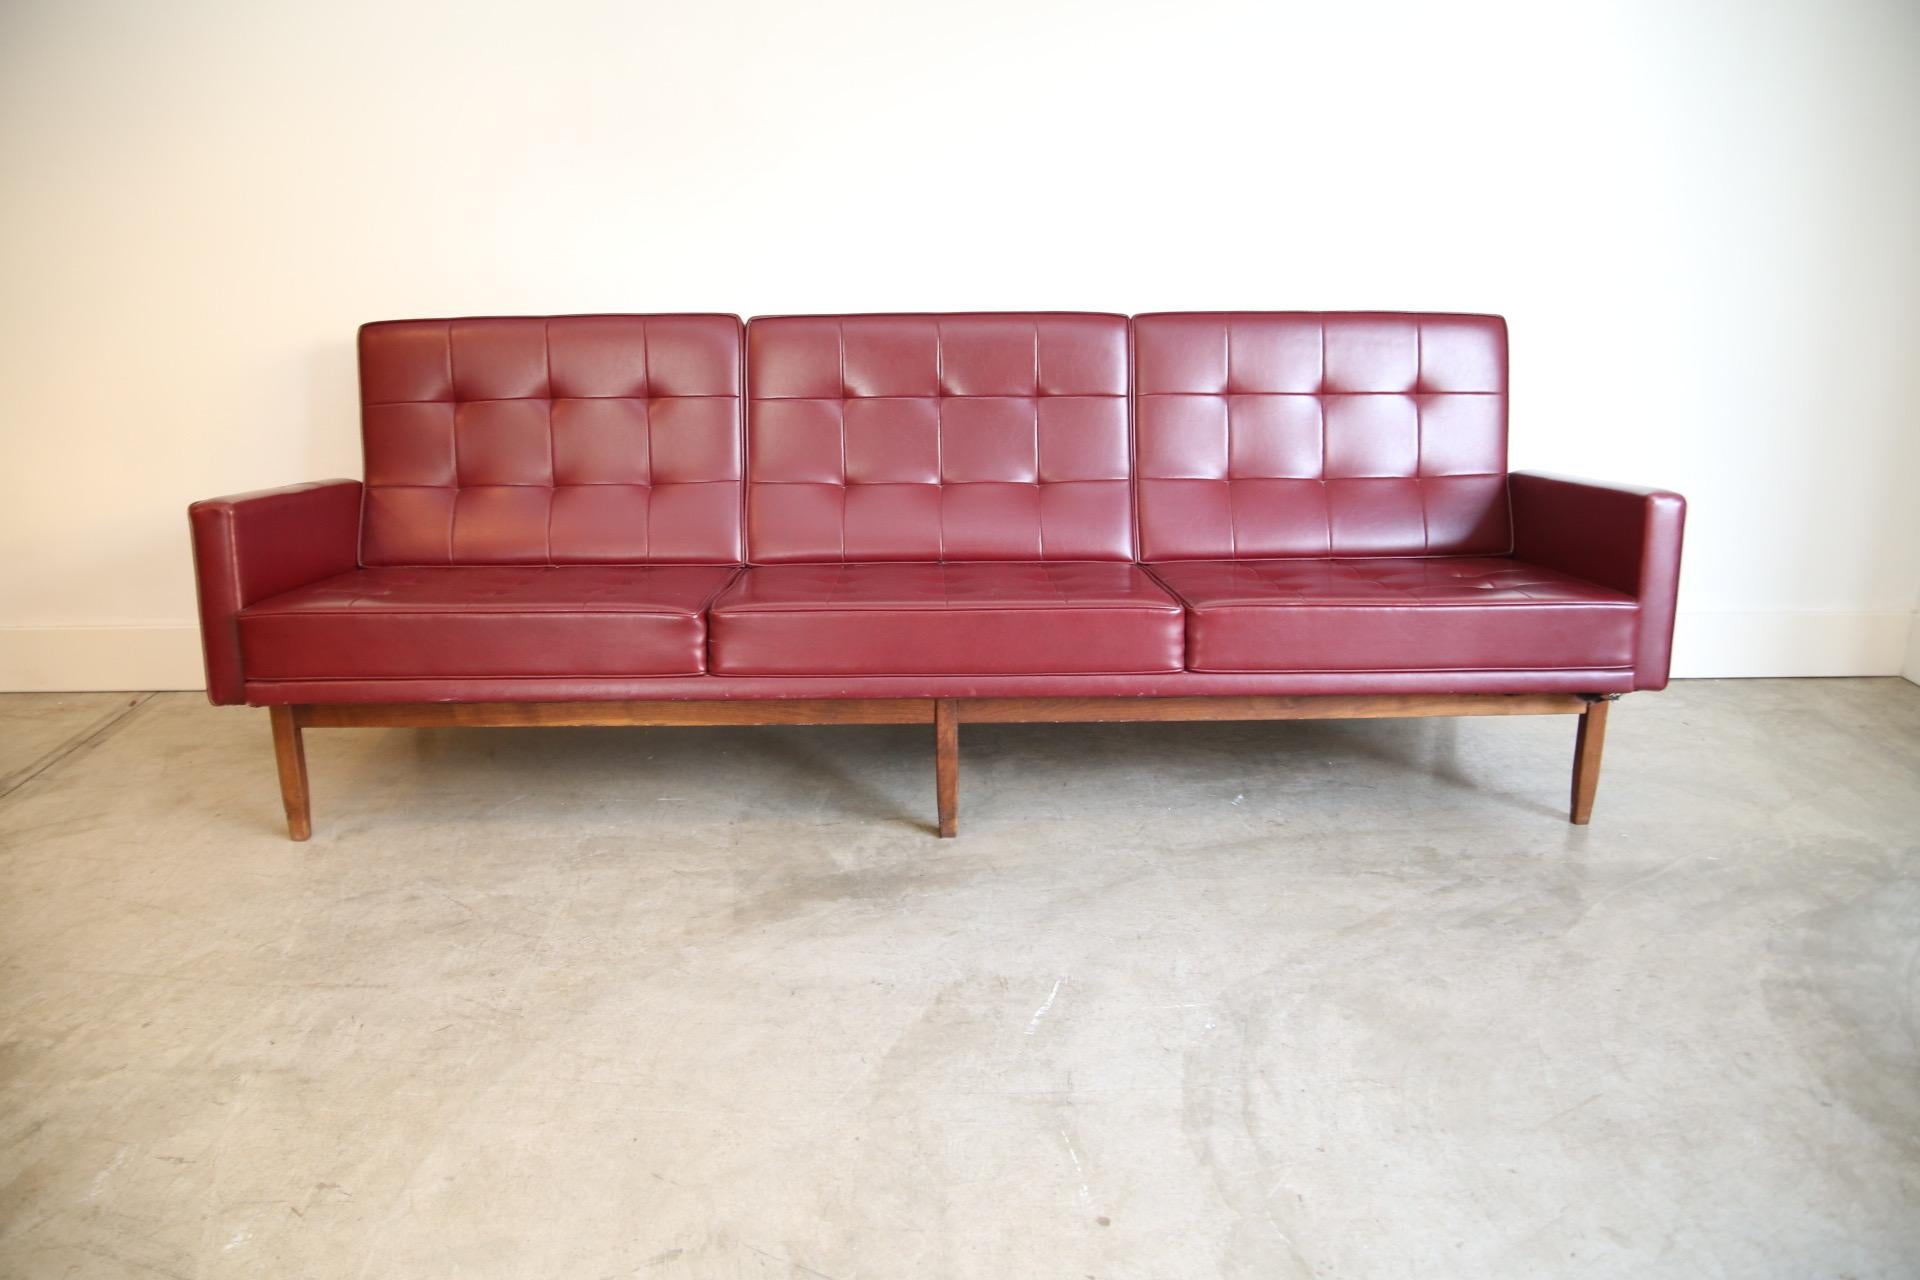 Designer: Florence Knoll
Manufacture: Knoll
Period/style: Mid-Century Modern
Country: US
Date: 1950s

This sofa was purchased from the Marcel Breuer Snower Estate designed by Marcel Breuer.